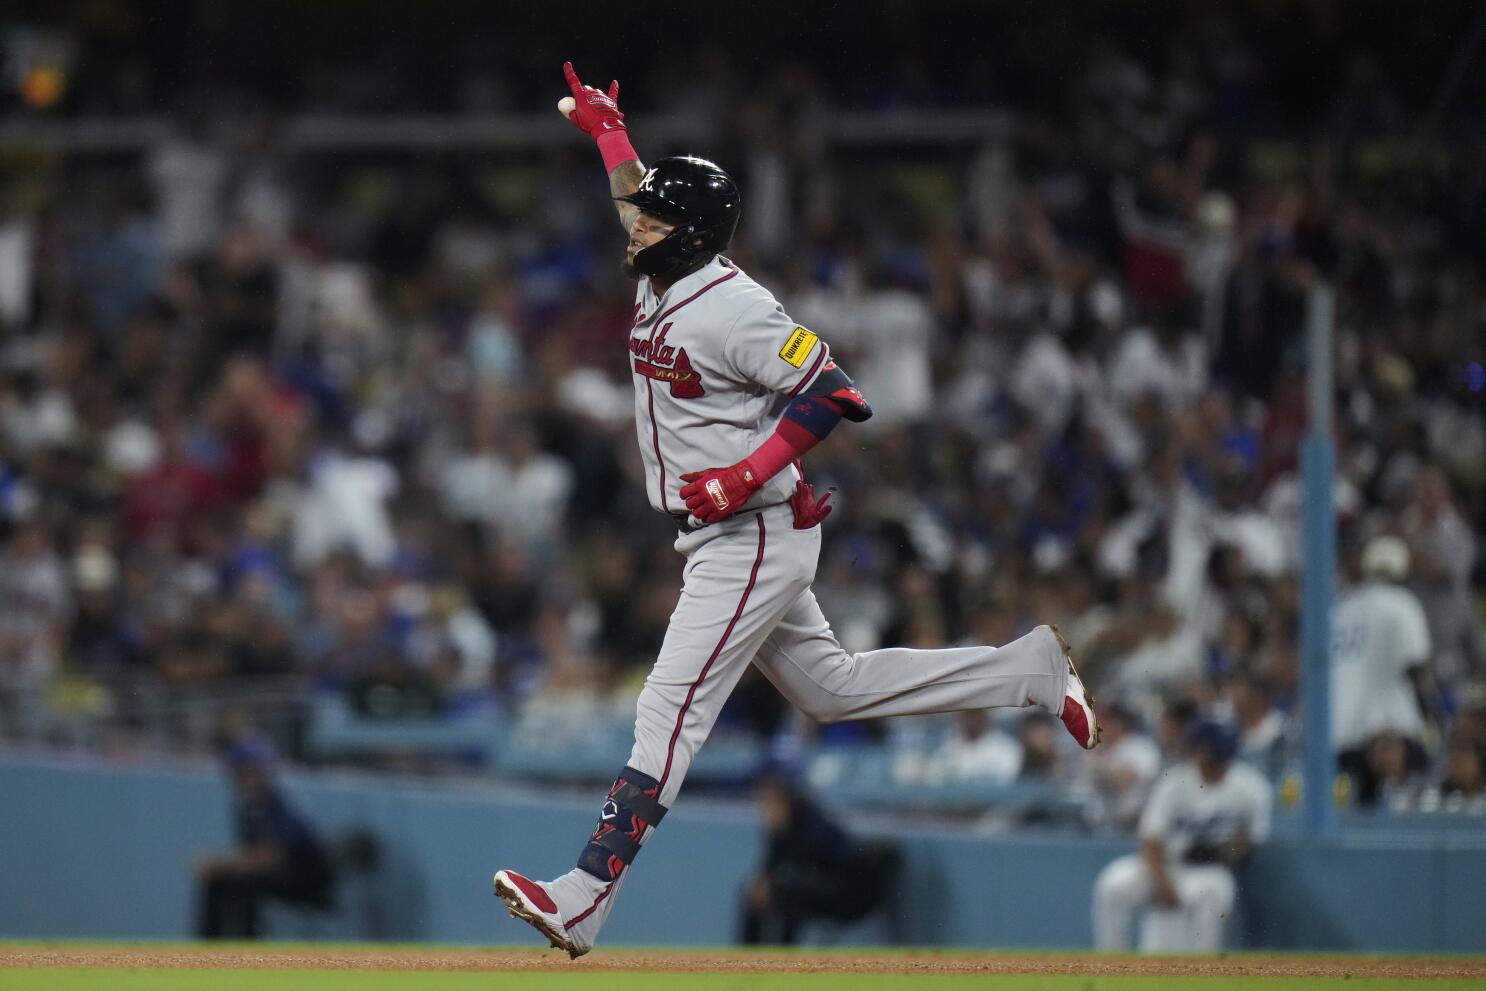 Mookie Betts 'Super Excited' For World Baseball Classic & Humbled